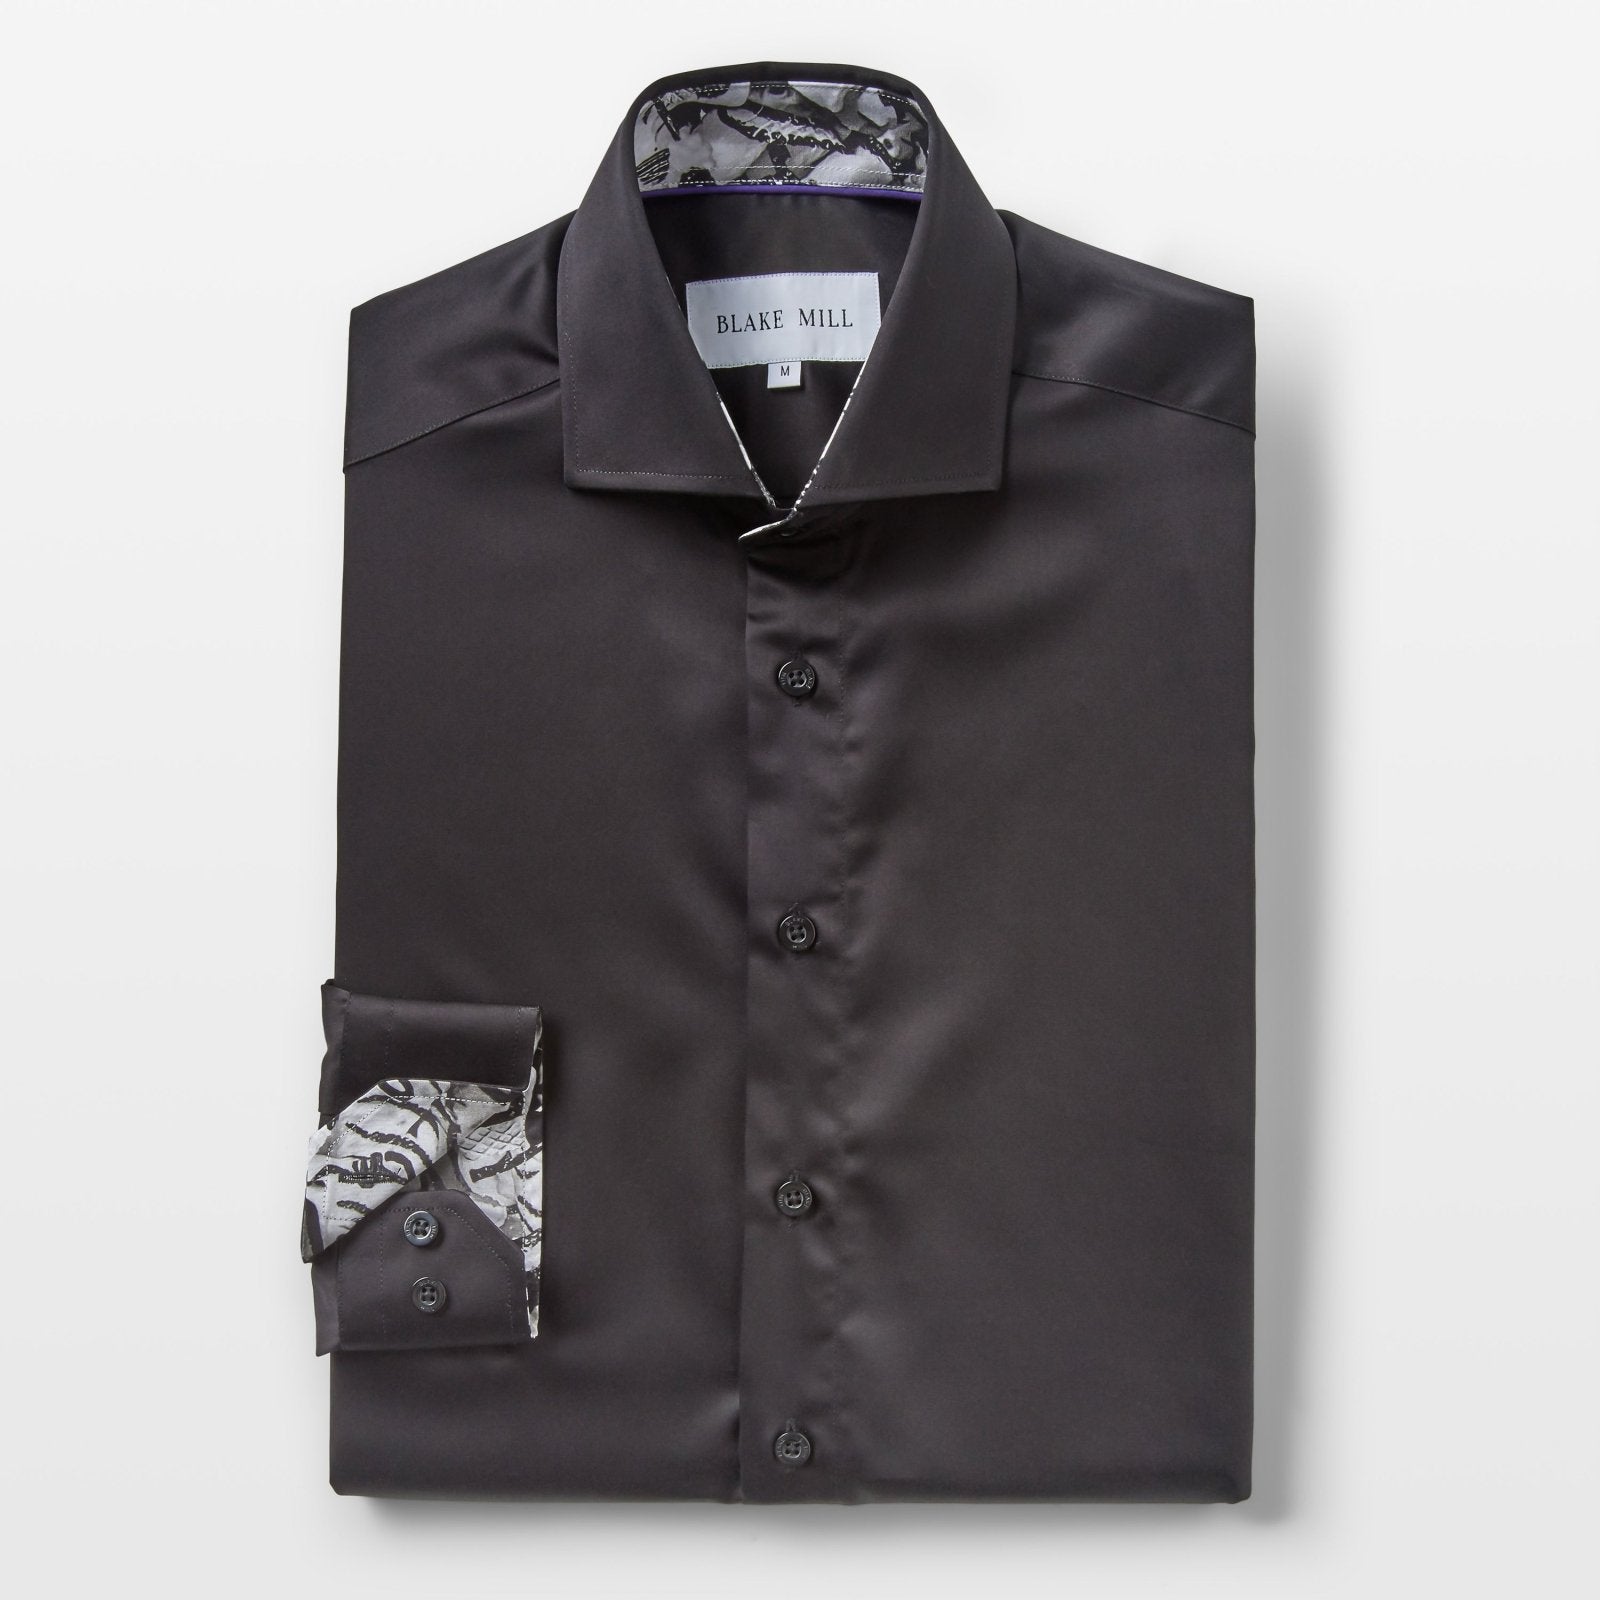 Black with Exotic Zebras Accents Shirt - Blake Mill